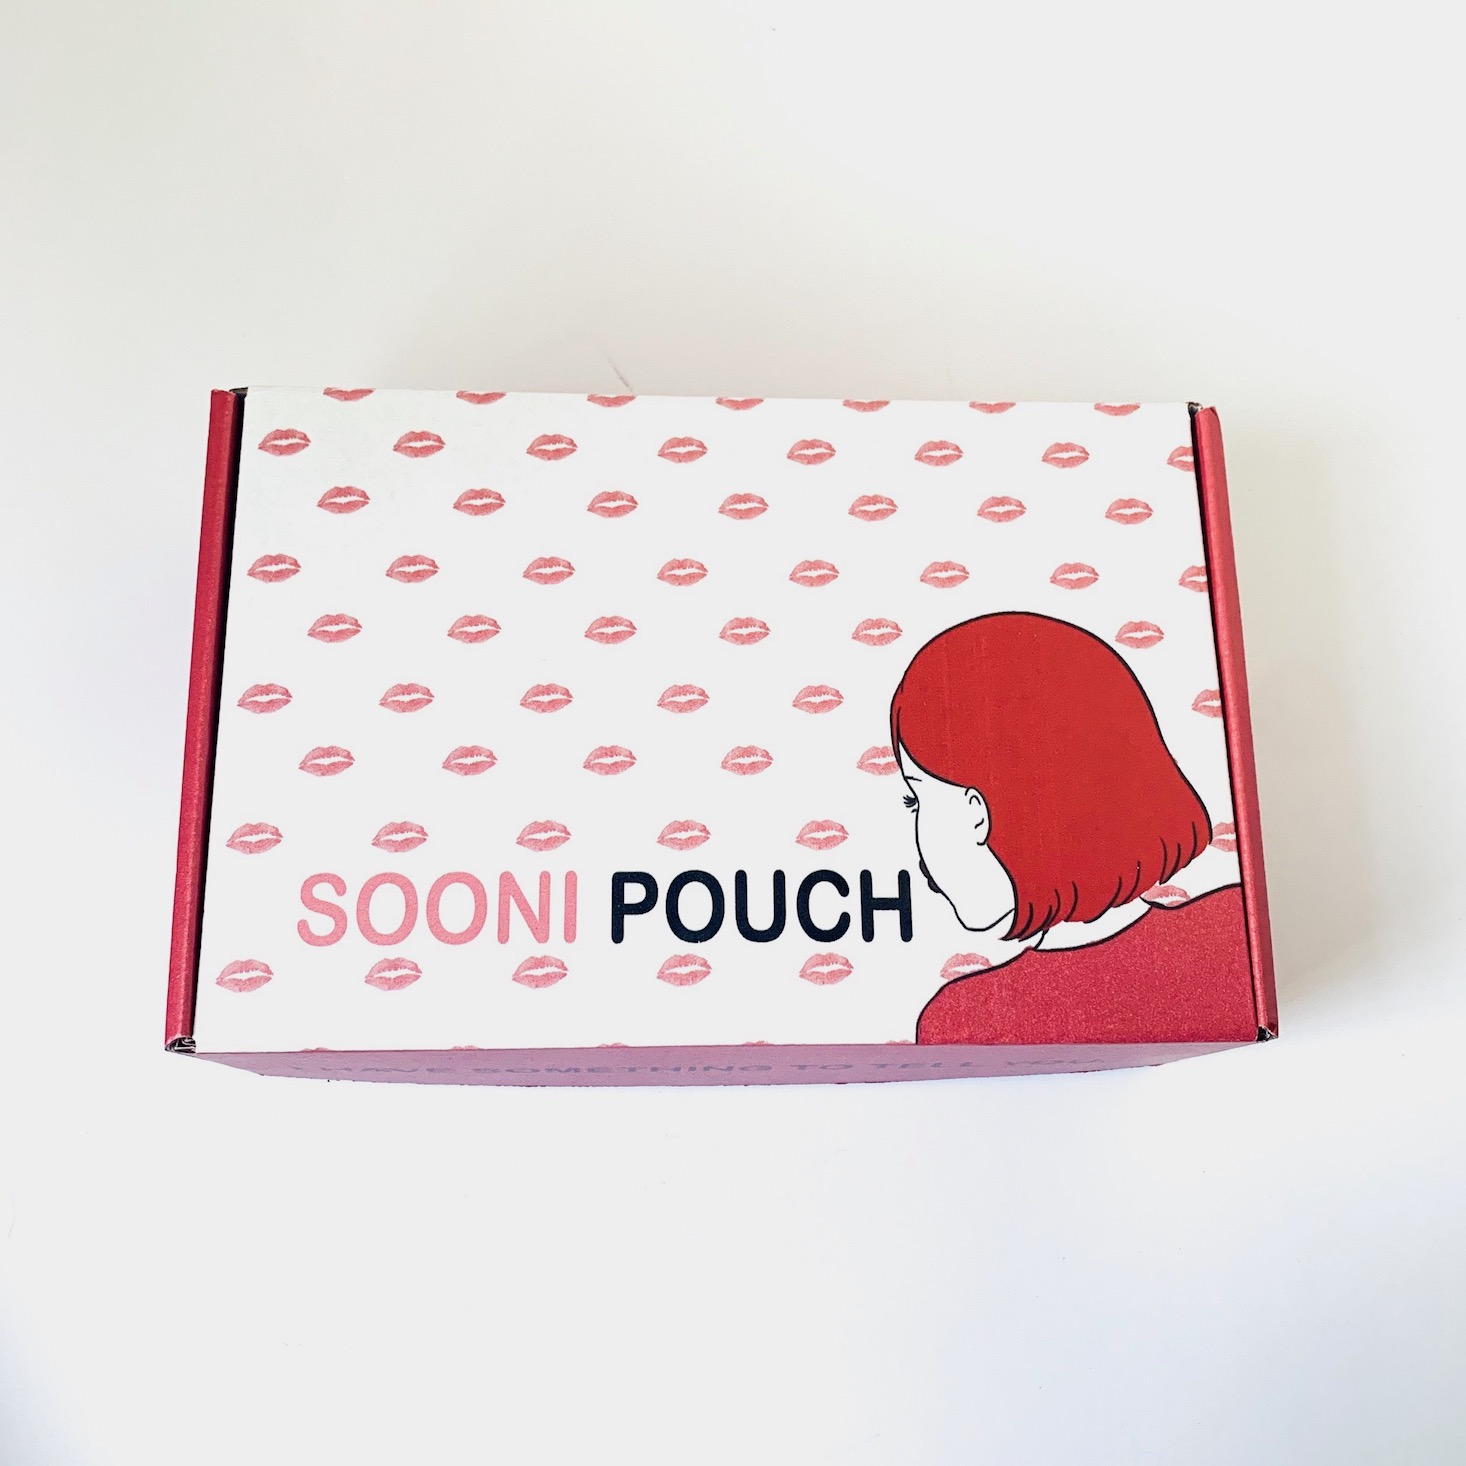 Sooni Pouch K-Beauty Subscription Review – May 2019